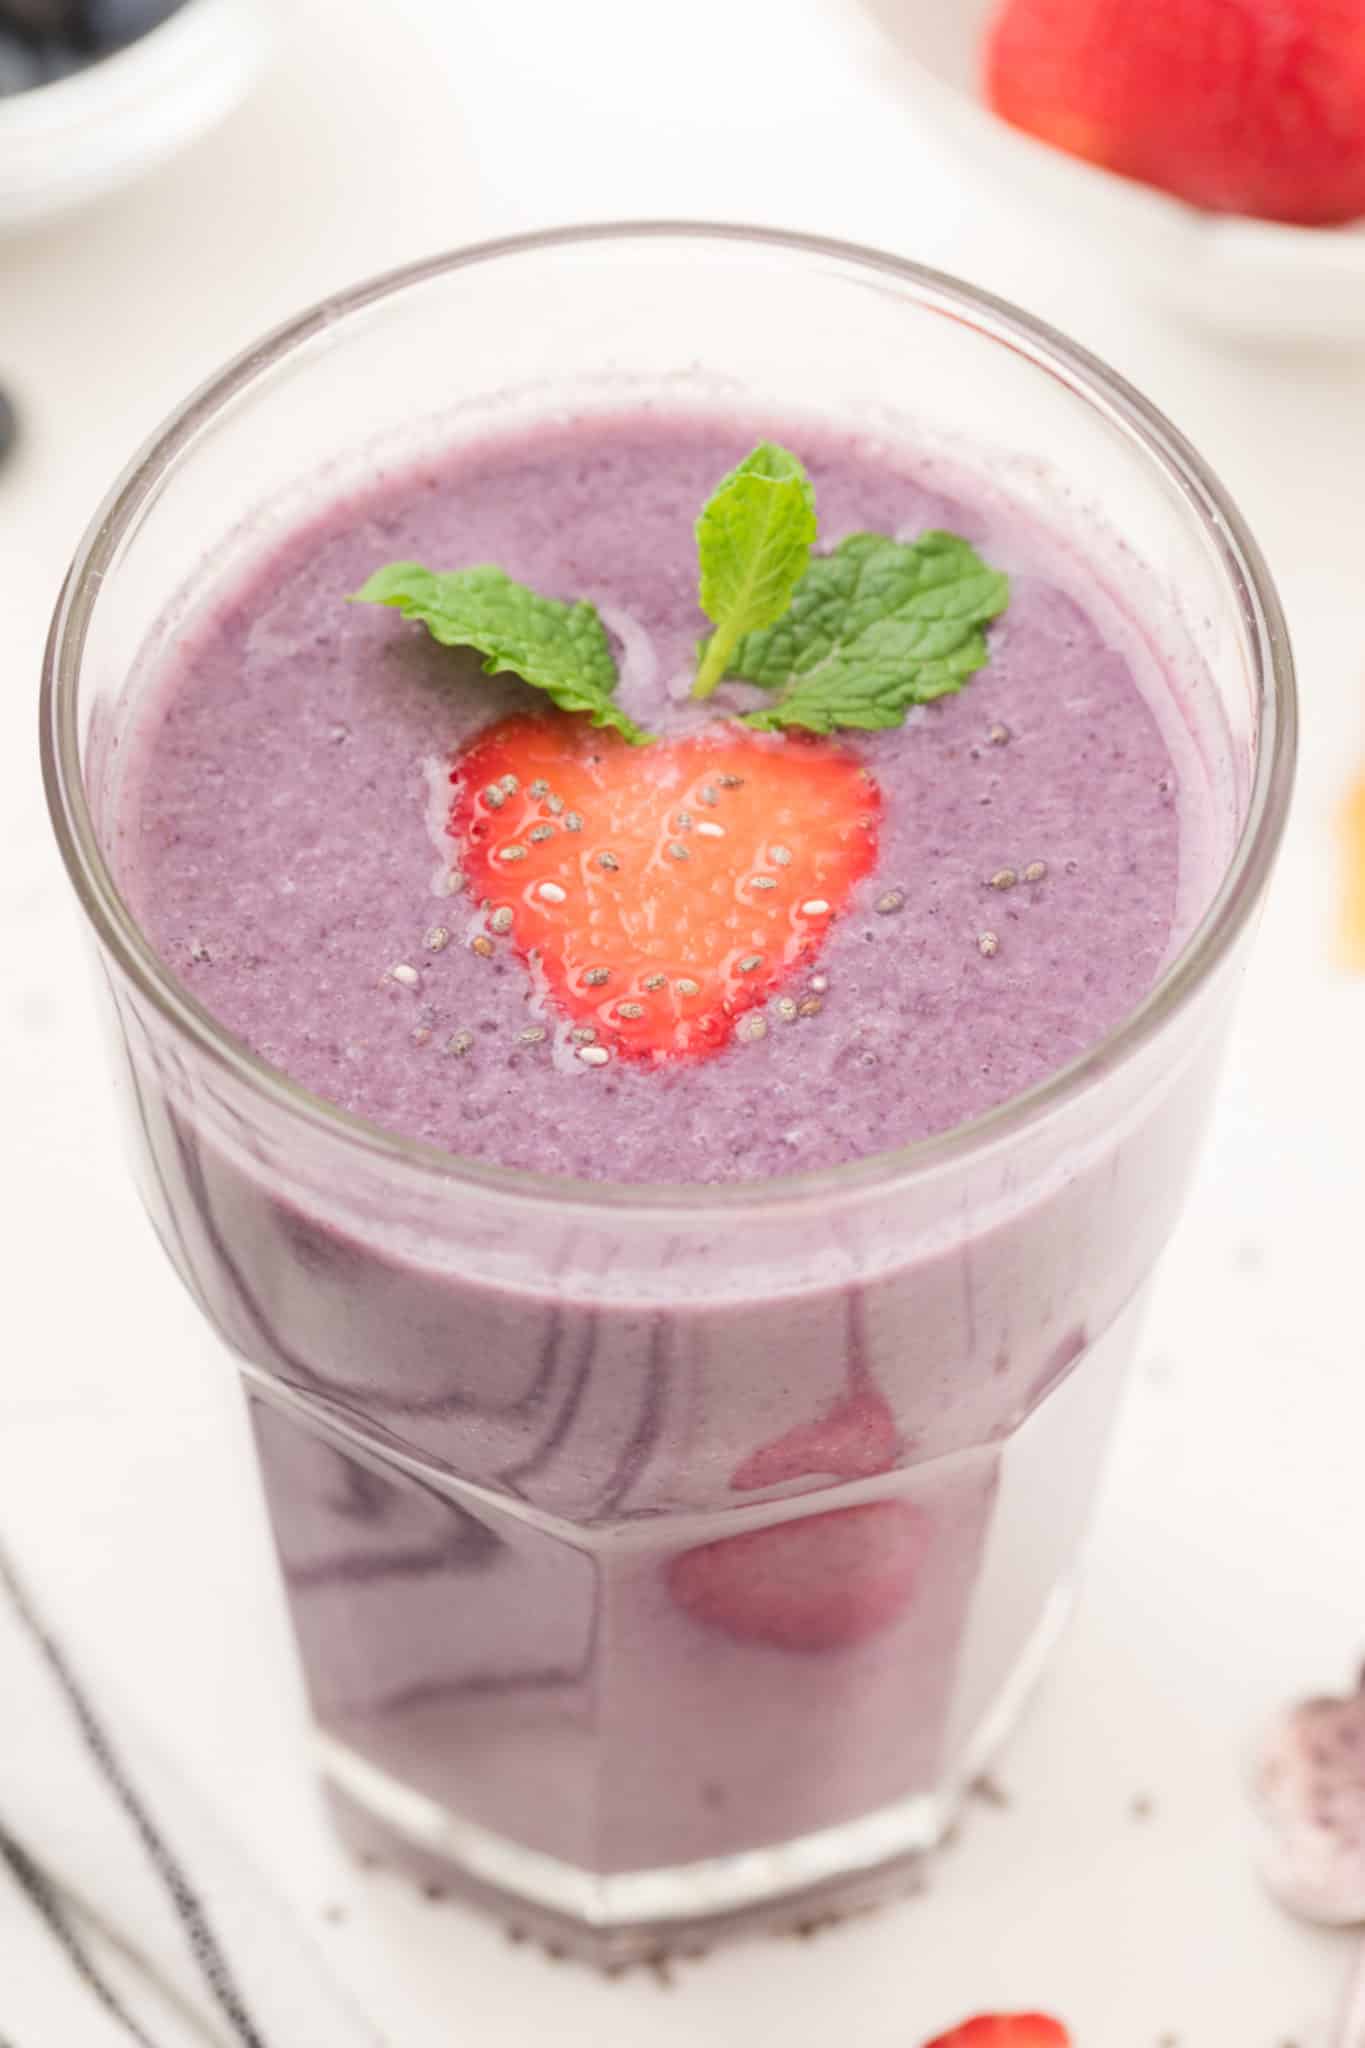 Strawberry and blueberry smoothie in a glass